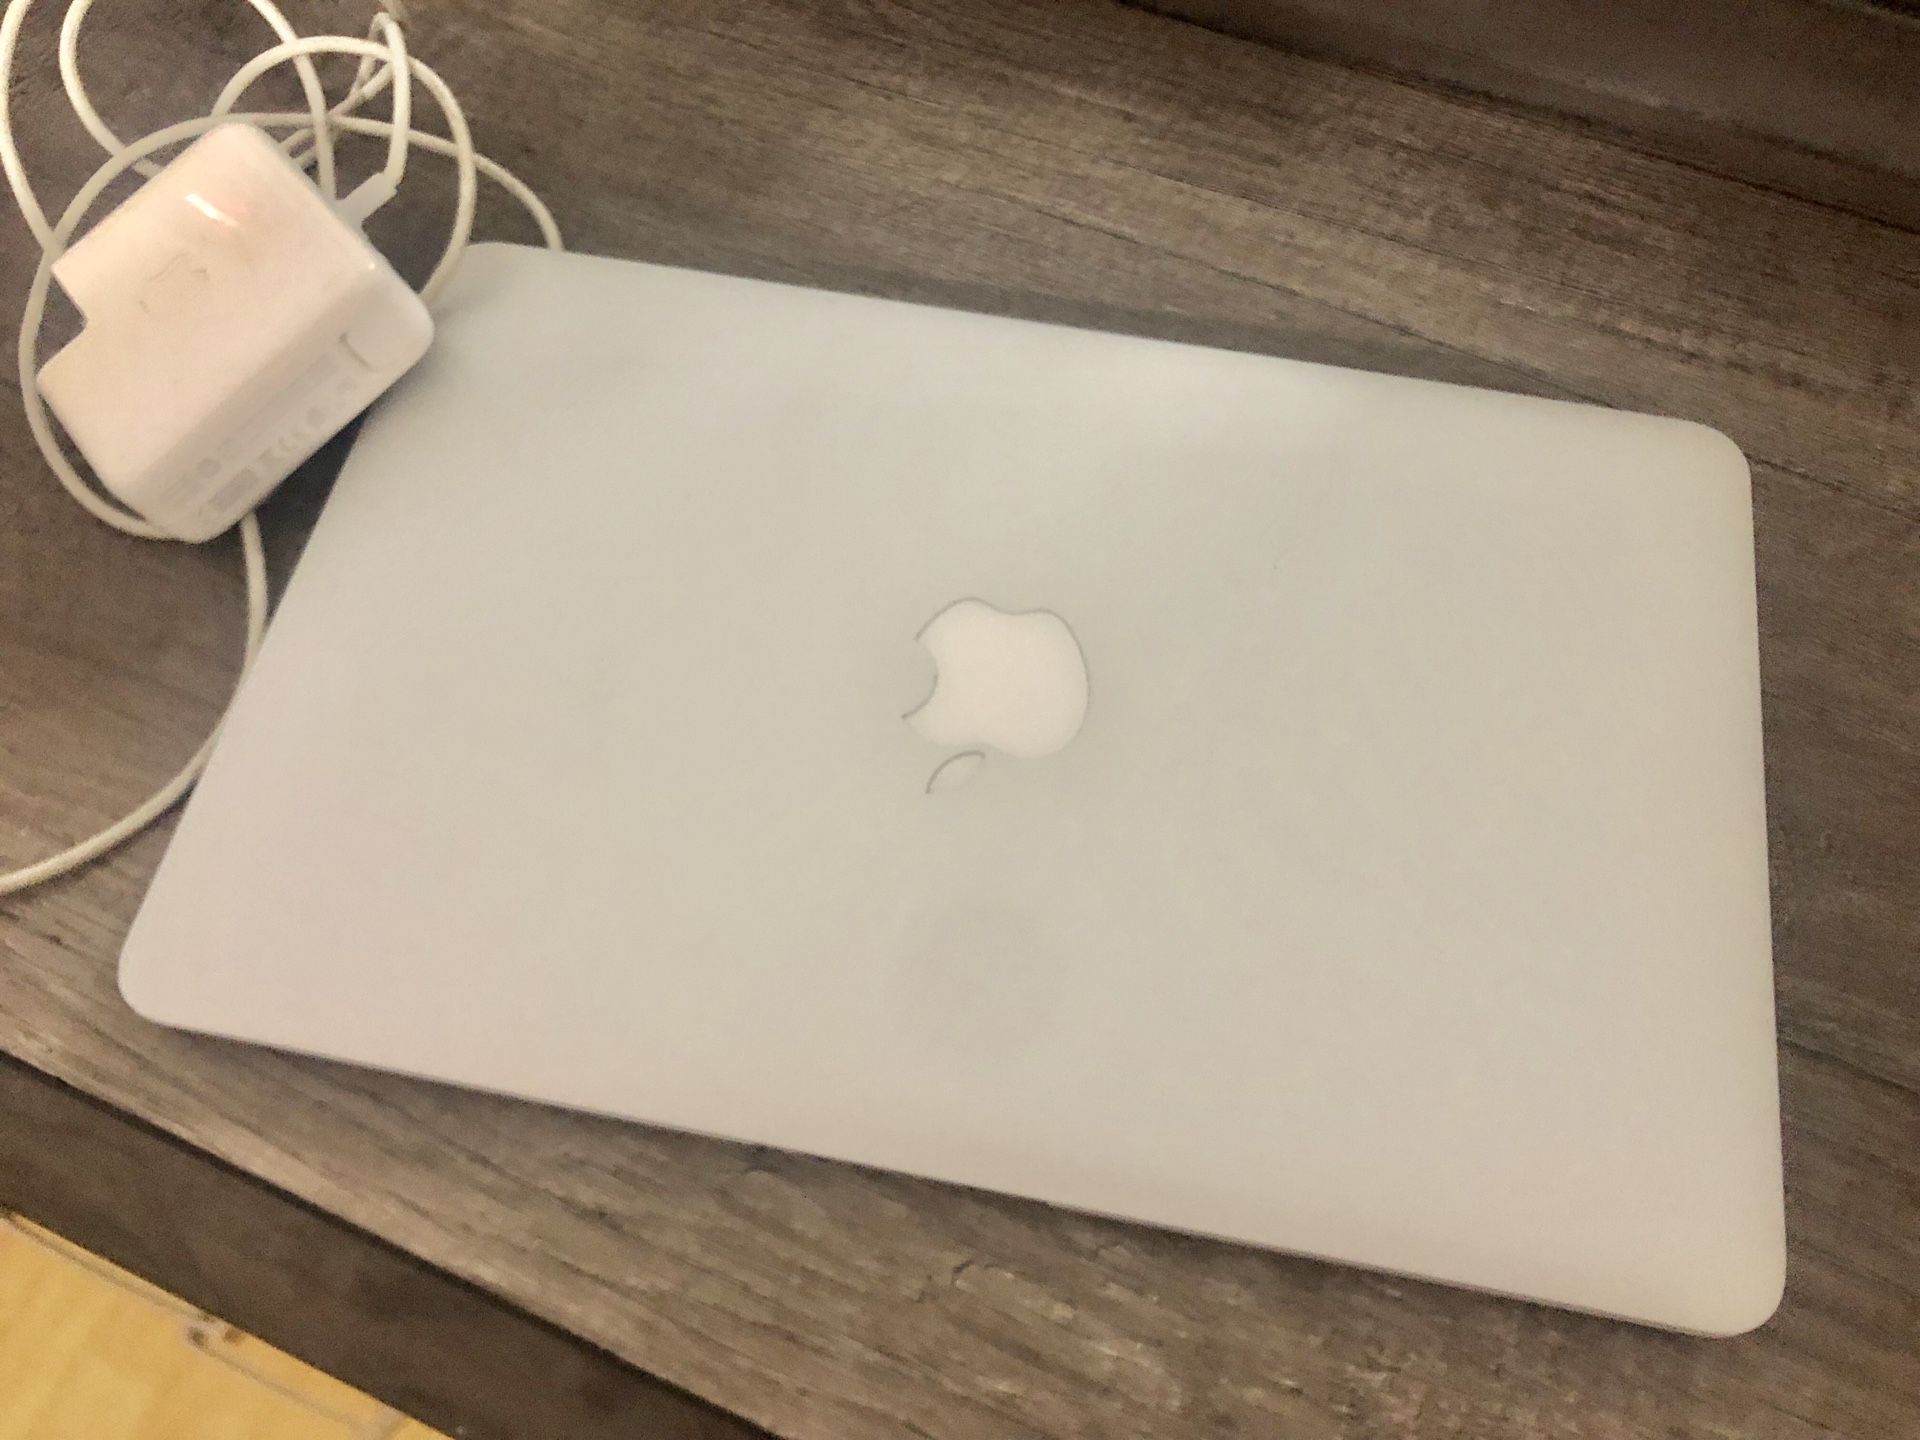 MacBook Air 11” good condition working condition